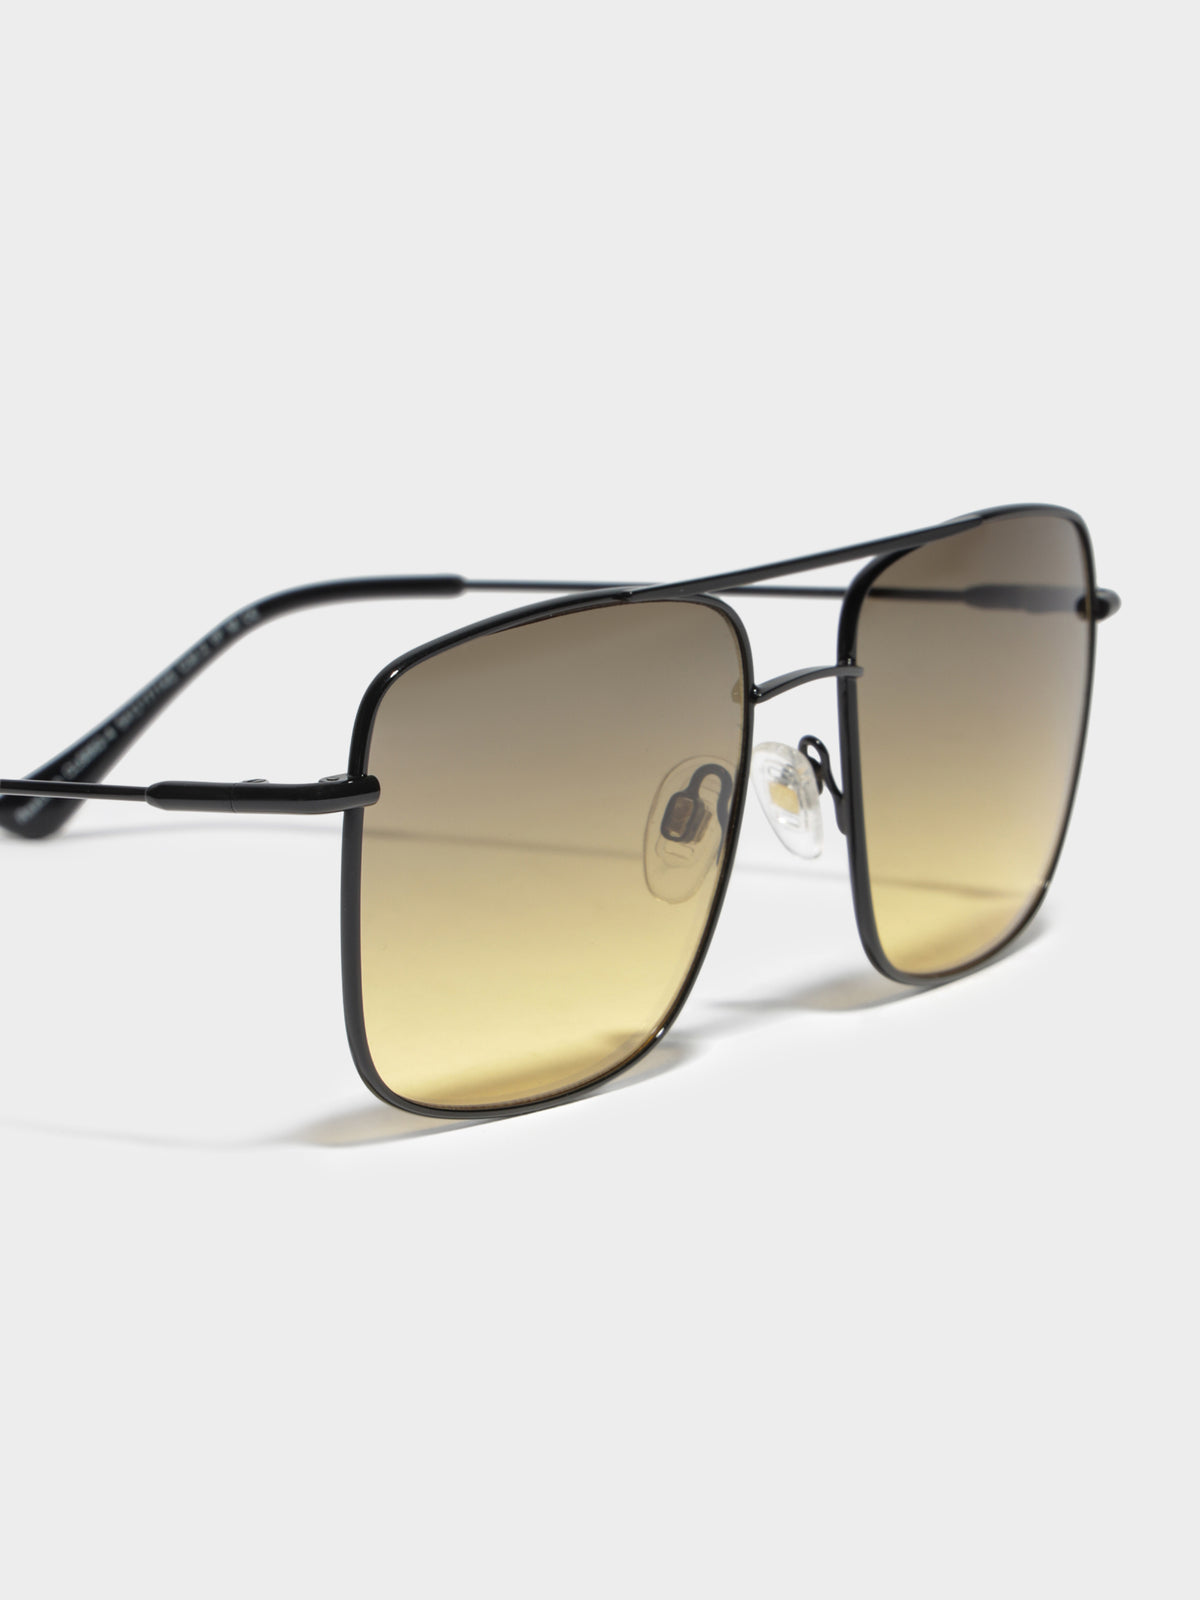 CL6862 Reaction Sunglasses in Black Smoke